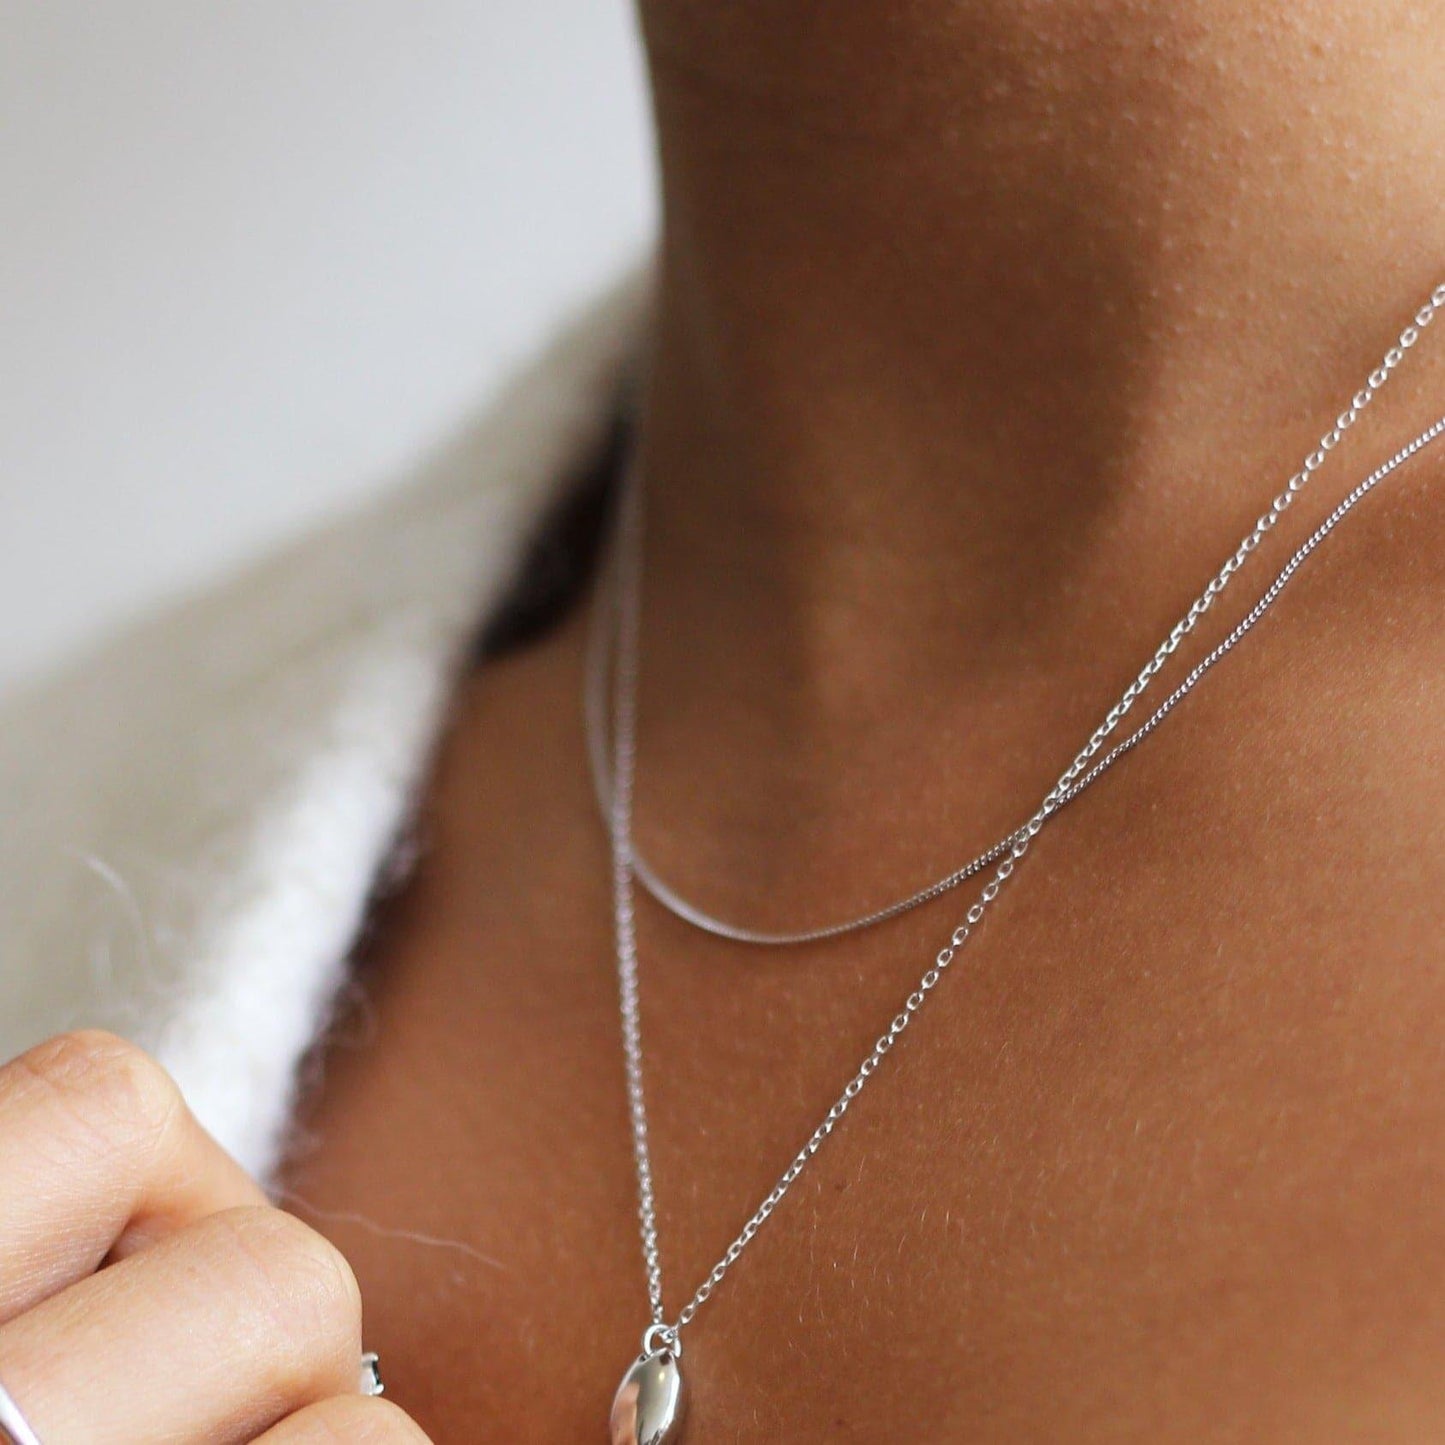 Chain necklace, Hypoallergenic jewelry